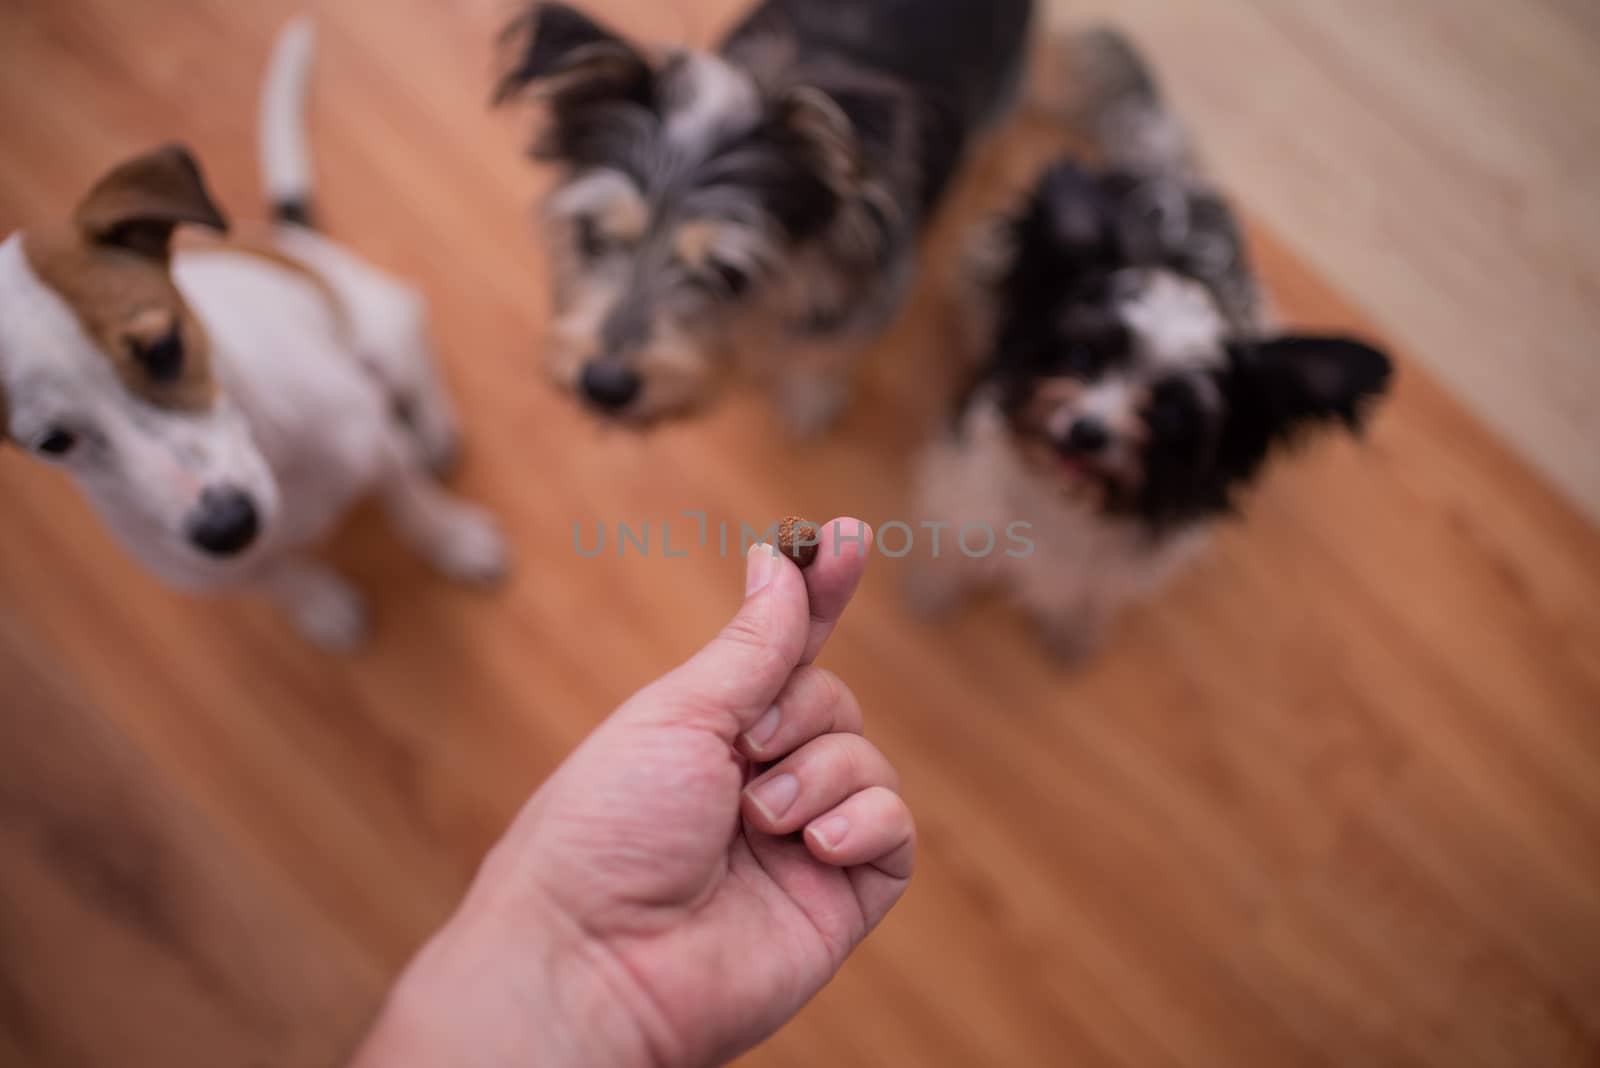 Focus on hand holding treat with blurred background of dogs by rushay